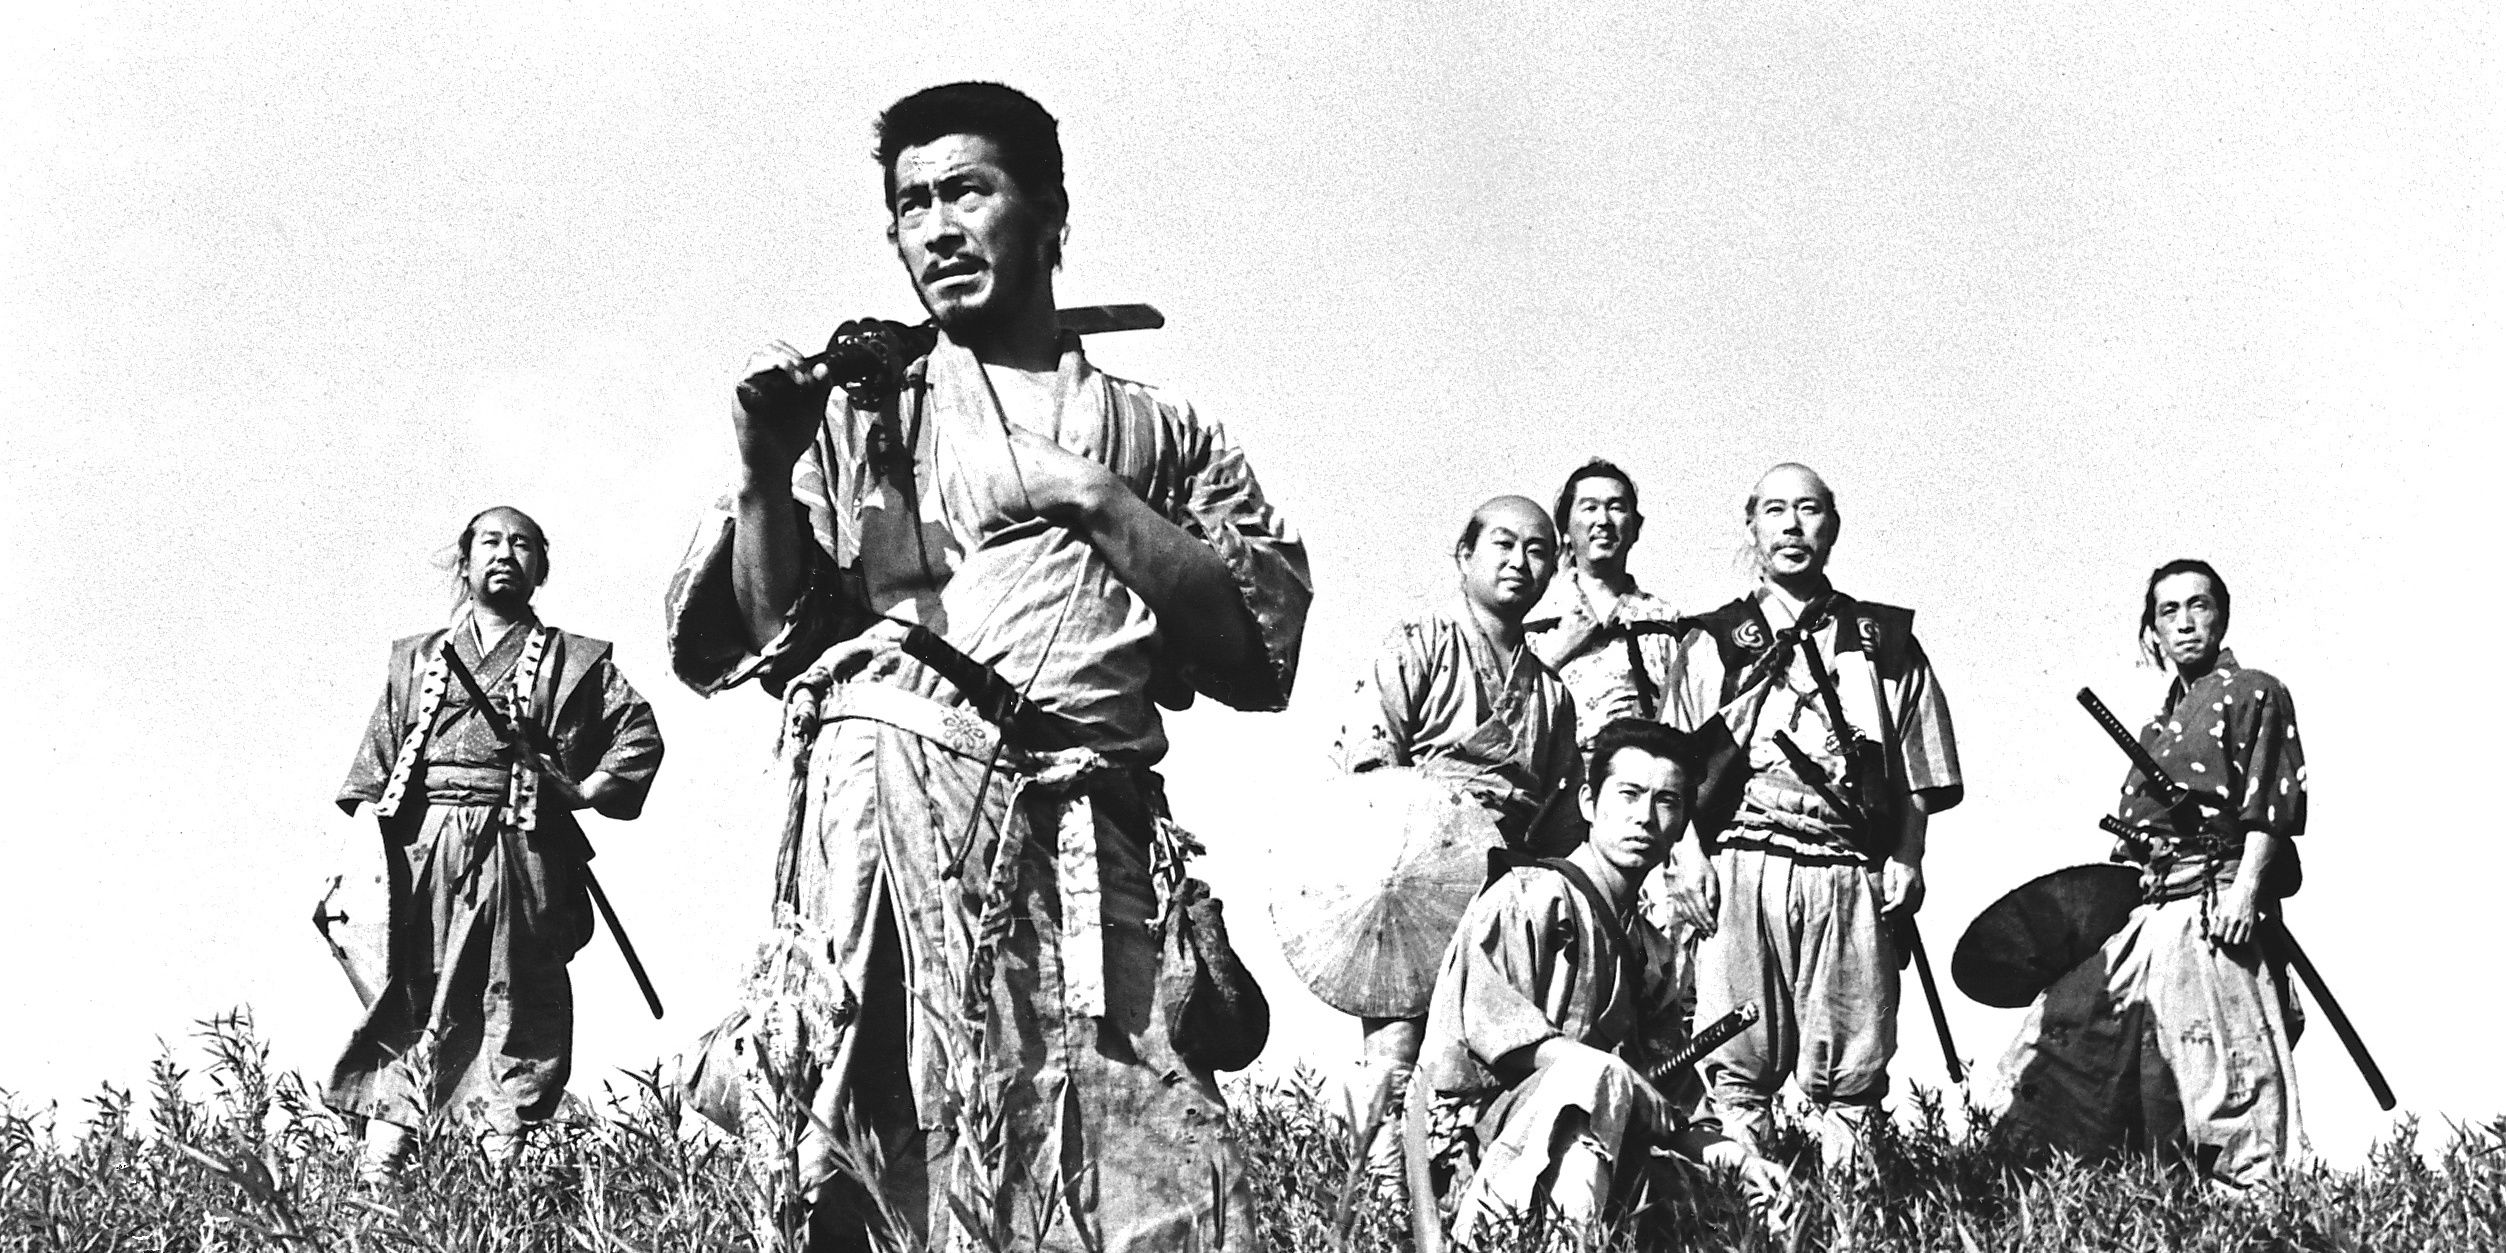 Toshiro Mifune, Takashi Shimura, and the rest of the main cast of Seven Samurai standing in a field